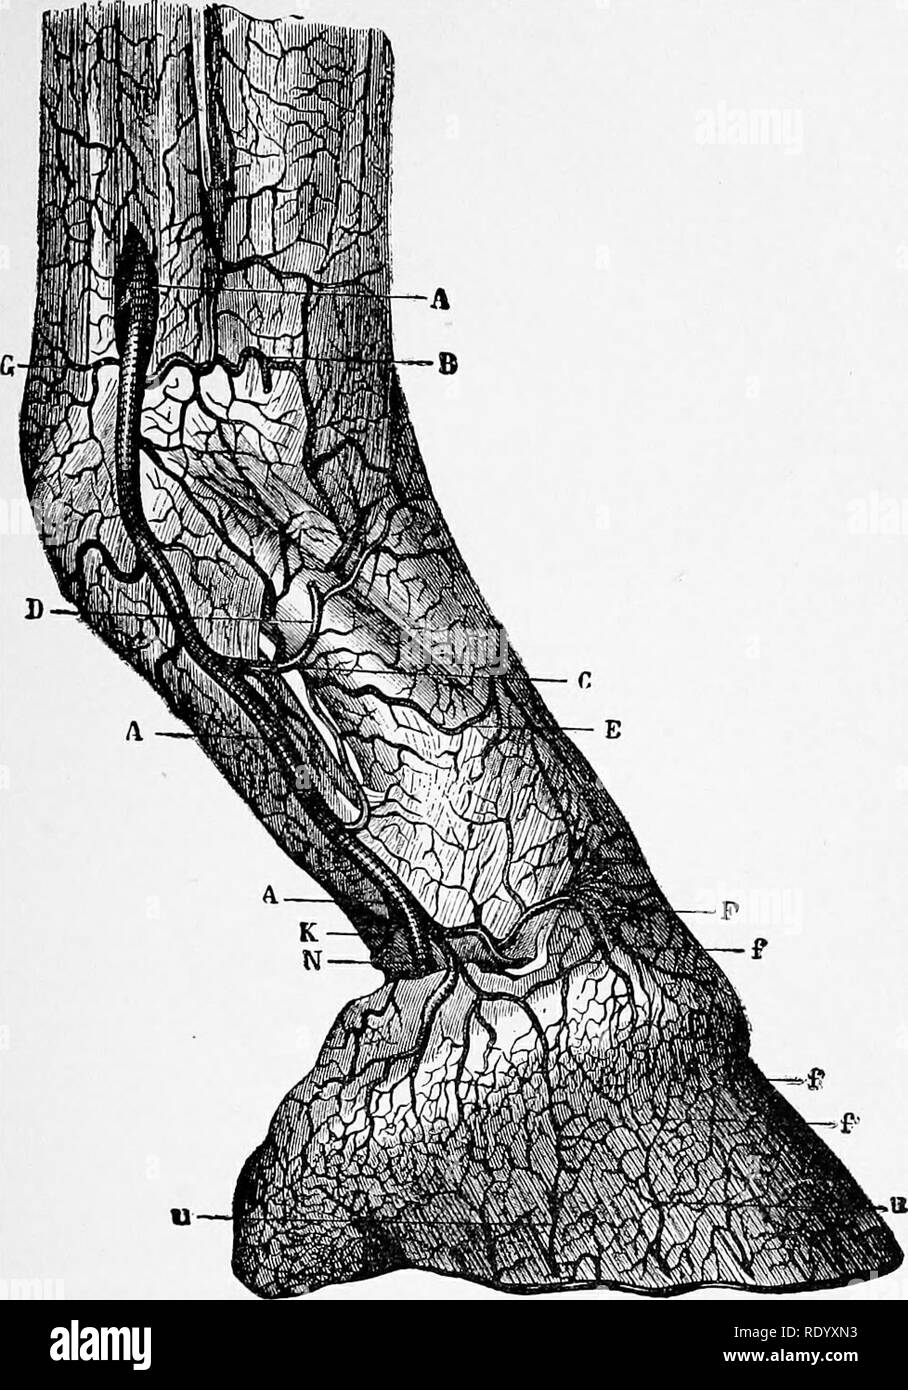 . Manual of operative veterinary surgery. Veterinary surgery. ANATOMY OF THE FOOT. 579. Fig. 480.—Arteries of the Digital Region. AAA.—Digital artery. B.—Transversal branch in front of fetlock Joint C—Per- pendicular artery of Percival. D.—Its ascending branch. E.—The descending branch. F.—Branch to form the superficial coronary circle. G.—Posterior transverse branches. K.—Artery of the plantar cushion. P.—Circumflex artery. C C—Ascending terminal branches of the digital artery. 3d, the velvety tissue or villous tunic which covers the plantar cushion at the interior face of the foot, and is th Stock Photo